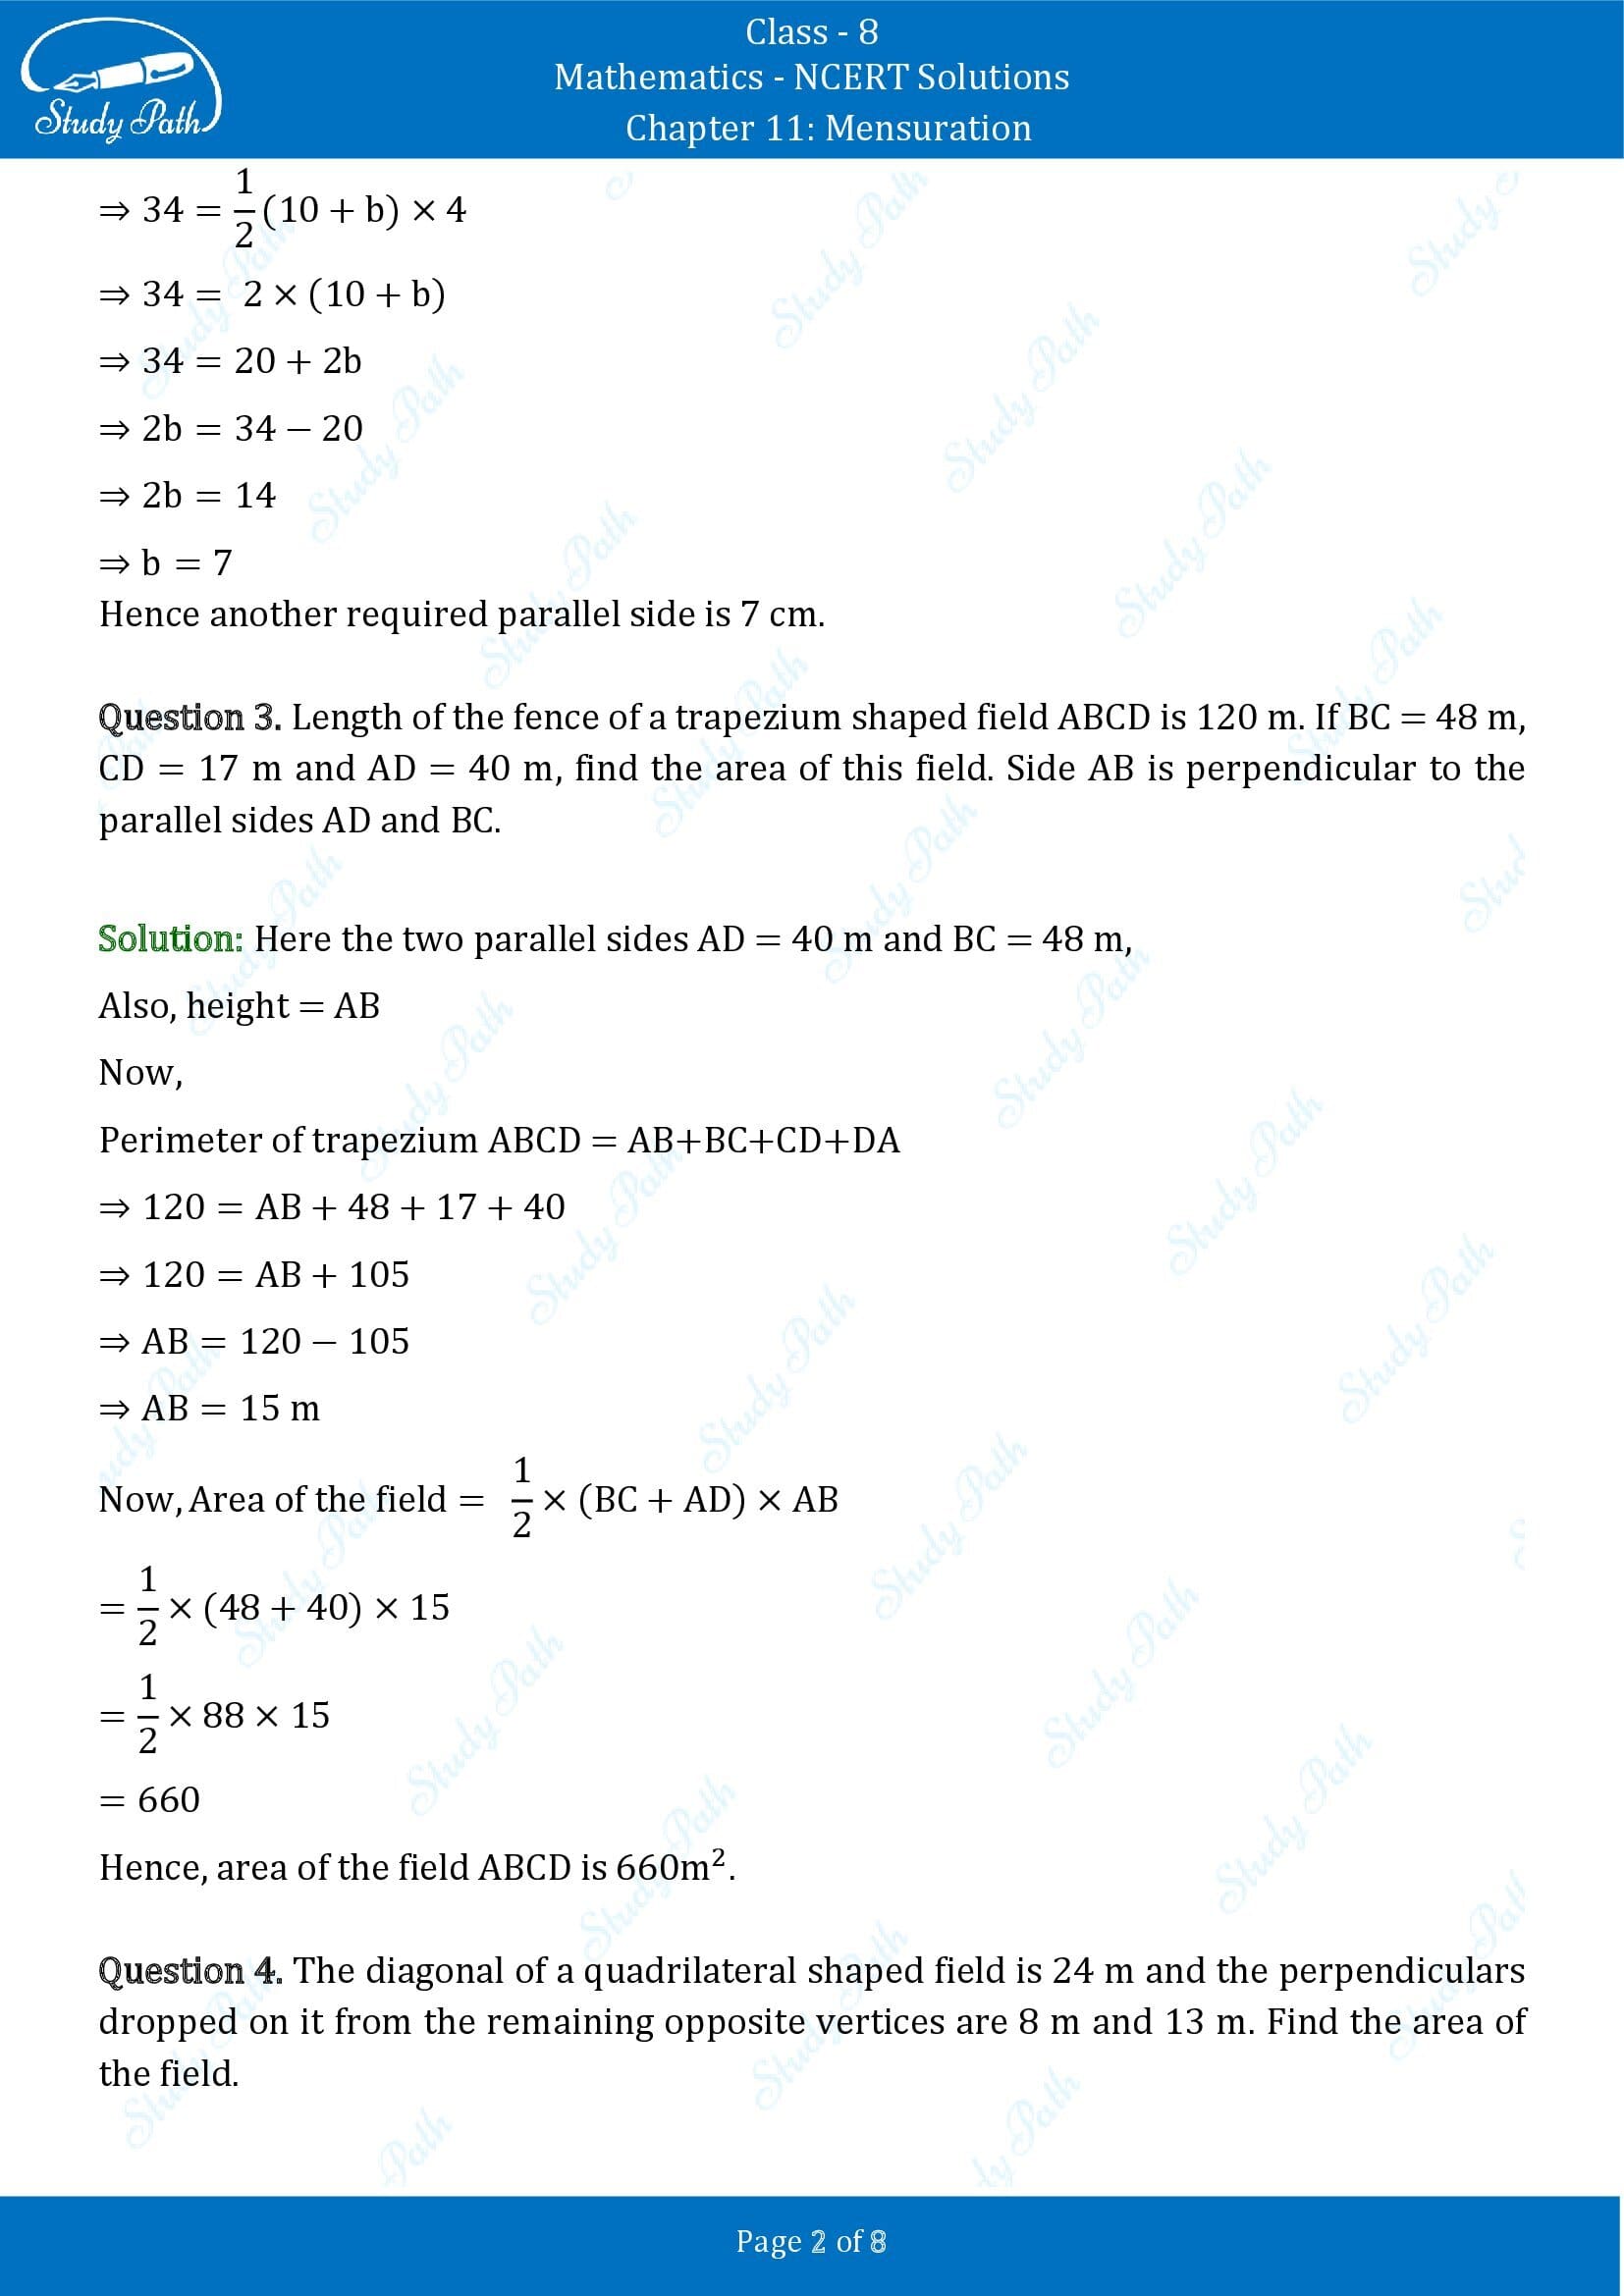 NCERT Solutions for Class 8 Maths Chapter 11 Mensuration Exercise 11.2 00002